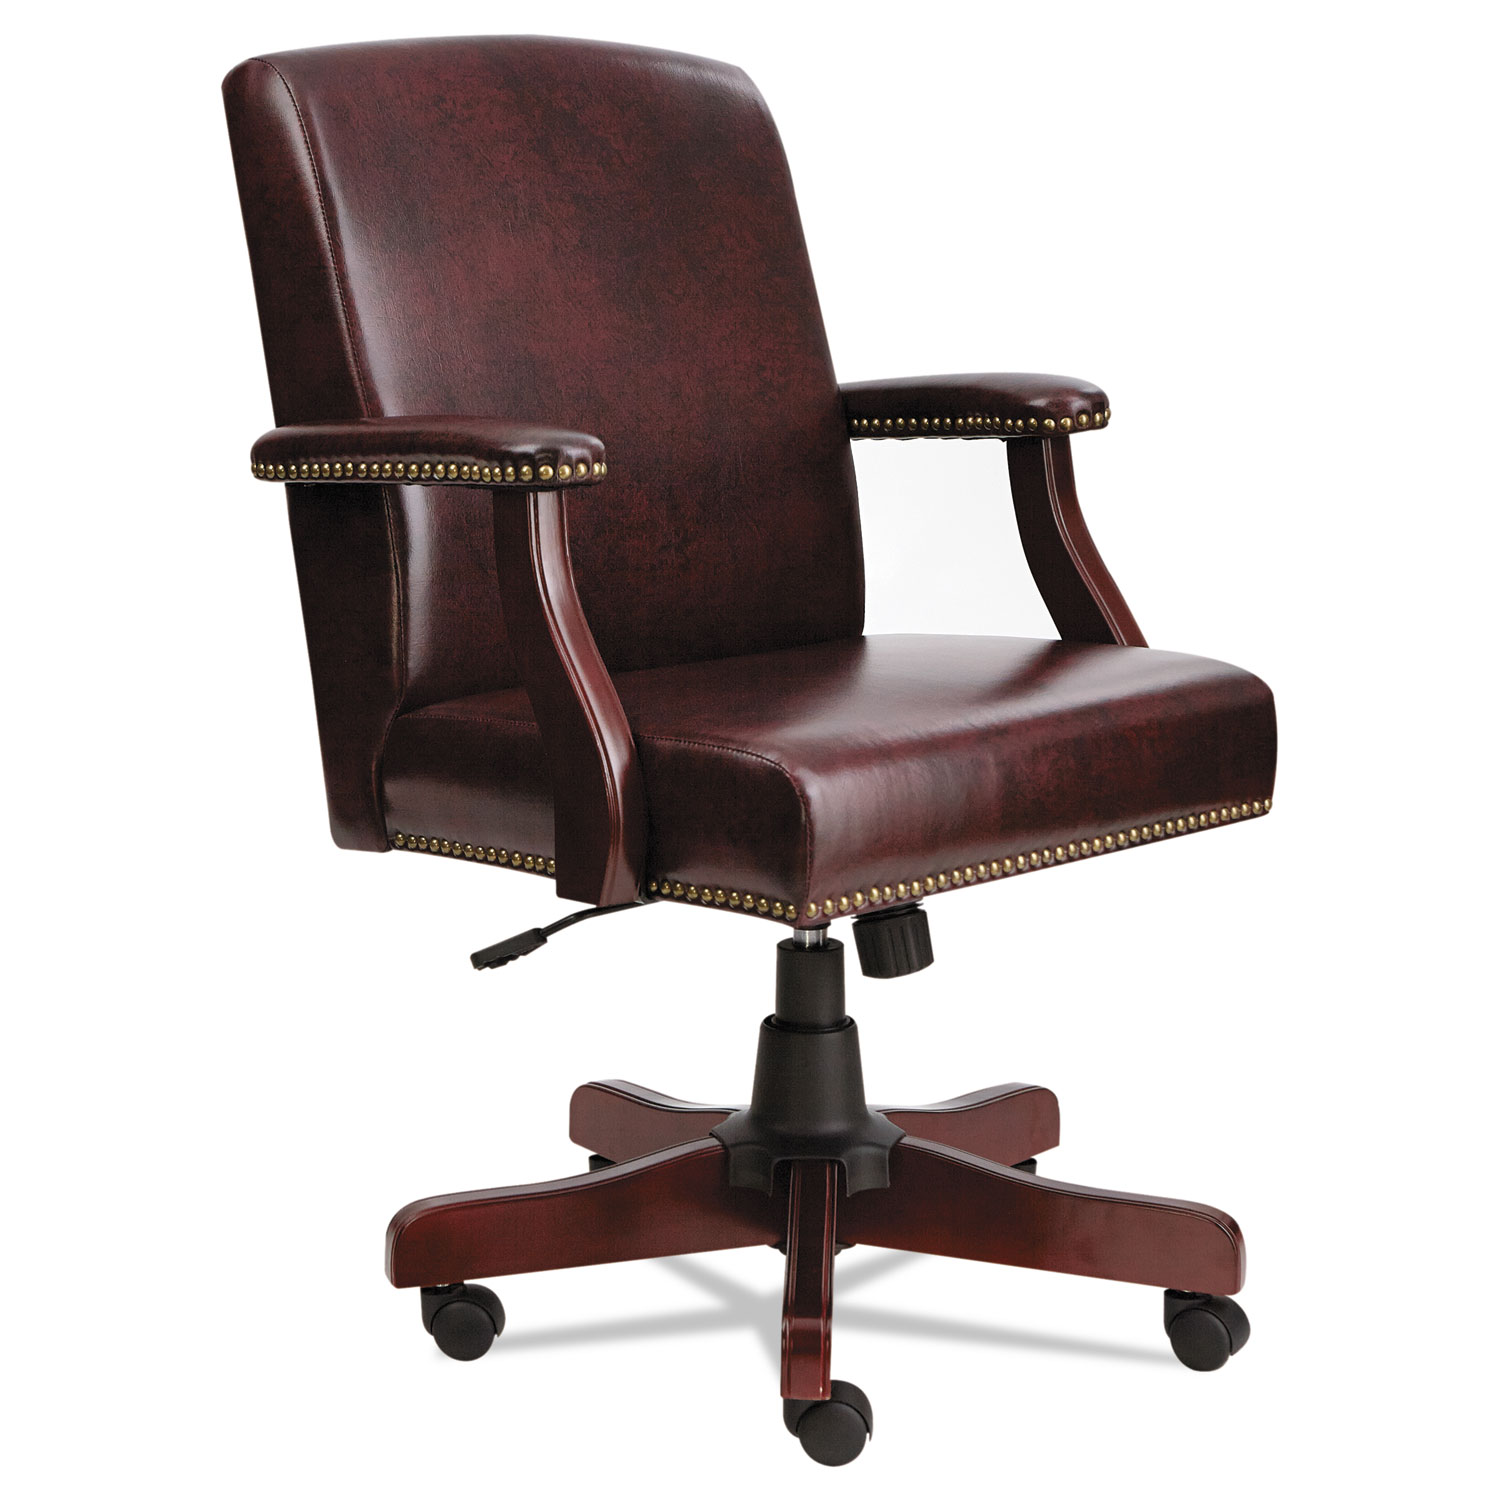  Alera ALETD4236 Alera Traditional Series Mid-Back Chair, Supports up to 275 lbs., Oxblood Burgundy Seat/Oxblood Burgundy Back, Mahogany Base (ALETD4236) 